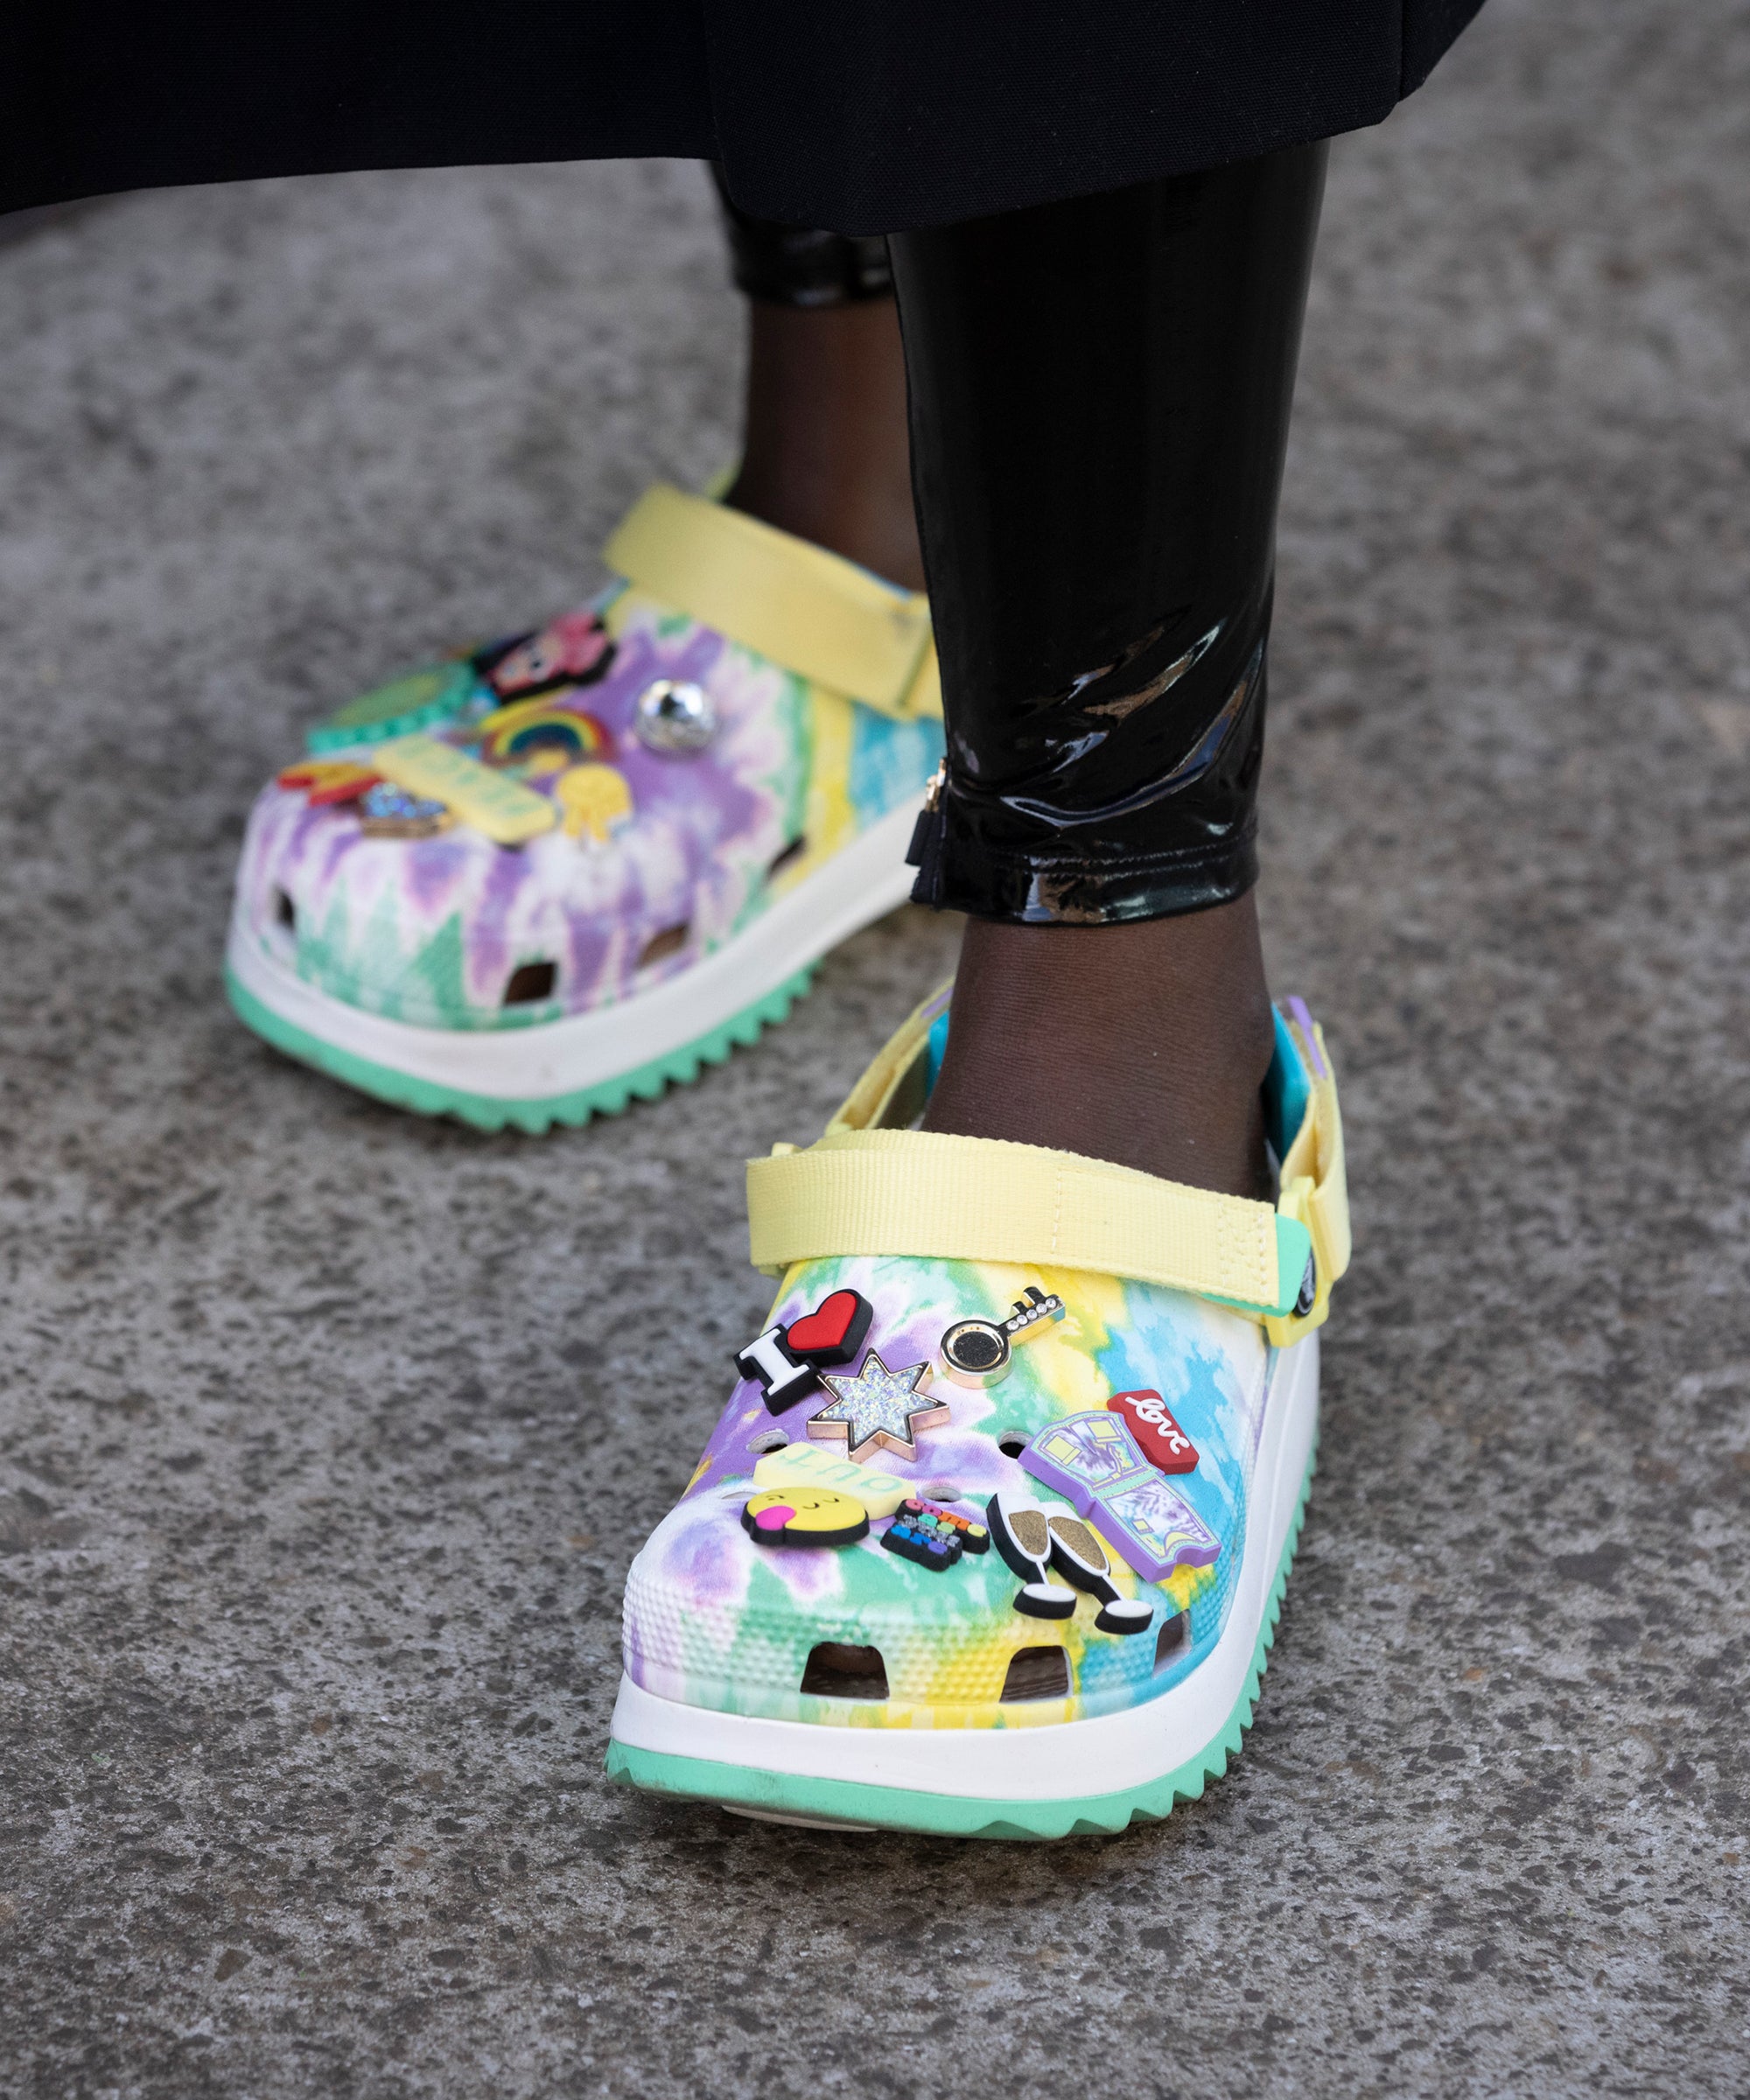 A Visual History of the Ugly Shoe Trend - PureWow